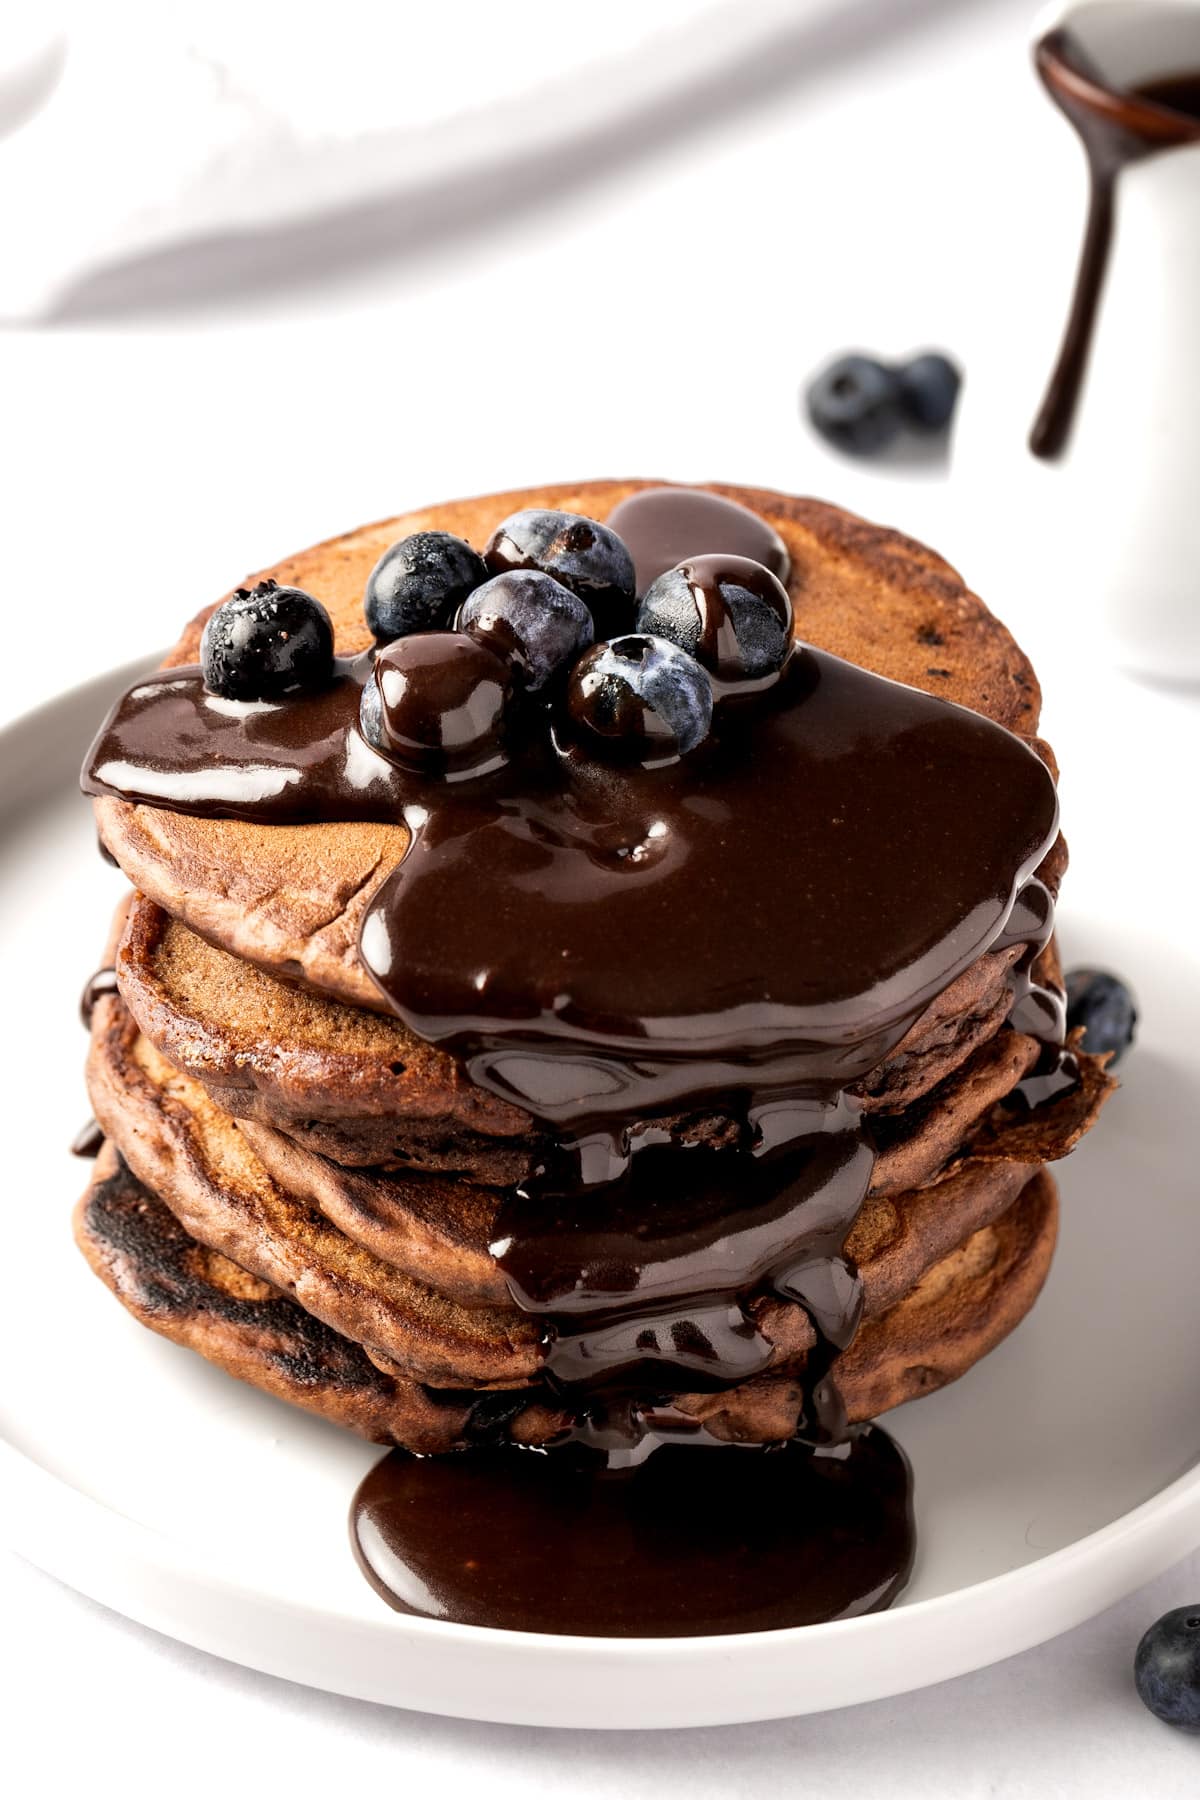 A stack of chocolate chai spiced pancakes drizzled in chocolate pancake sauce, topped with blueberries, on a white plate.